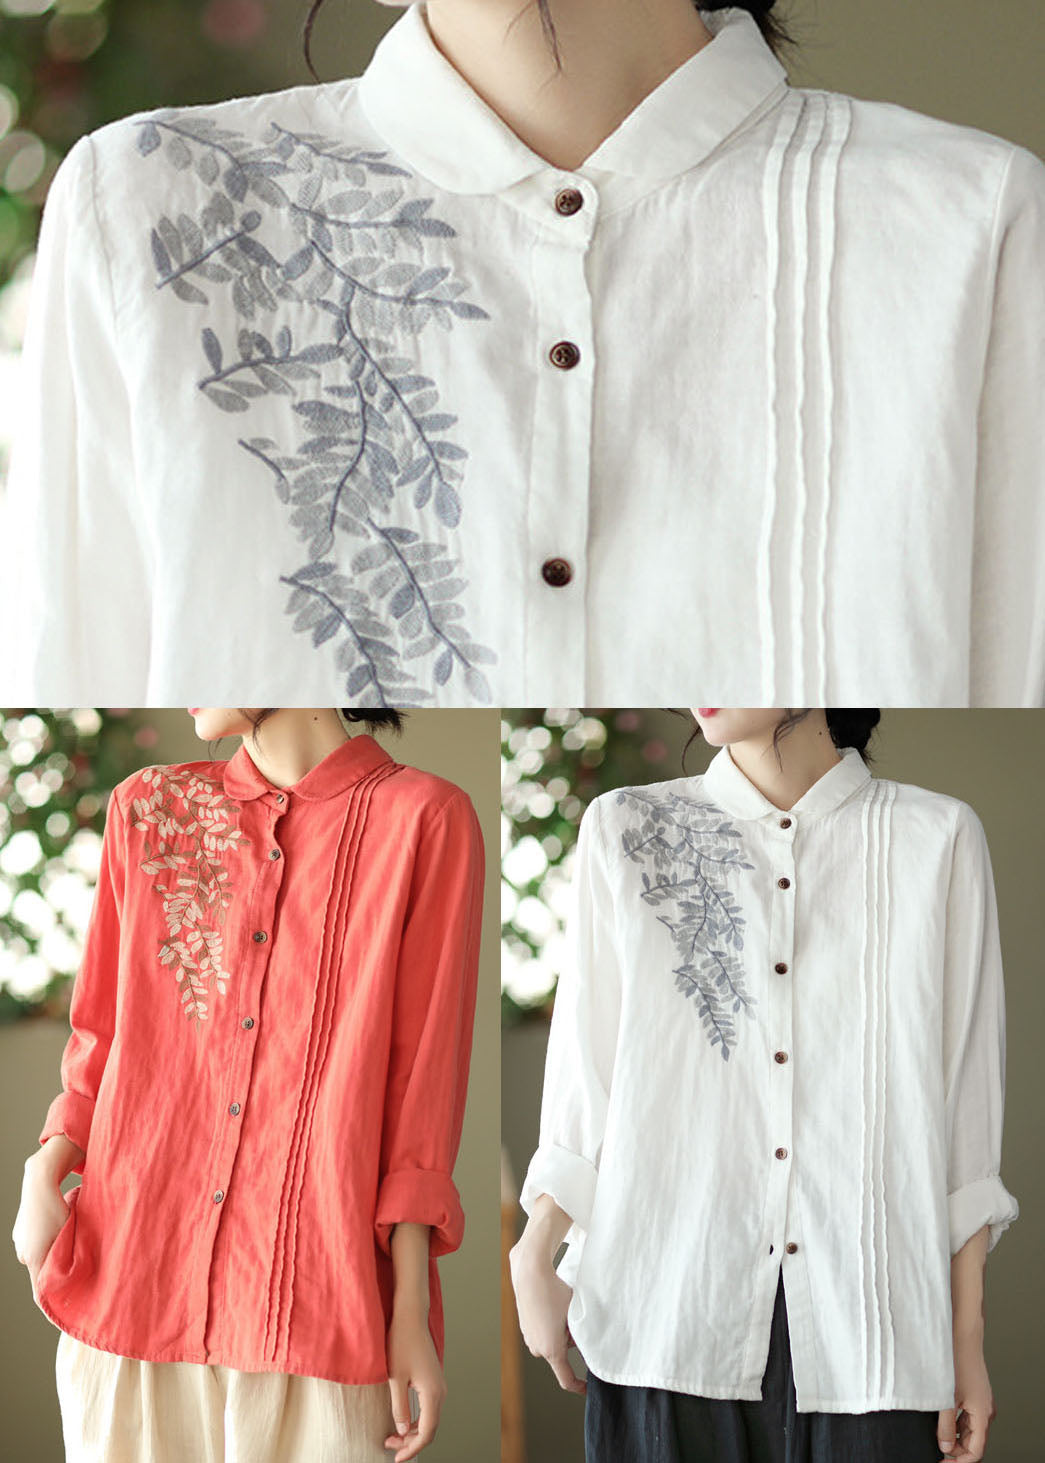 Women White Peter Pan Collar Embroideried Cotton Blouse Top Spring